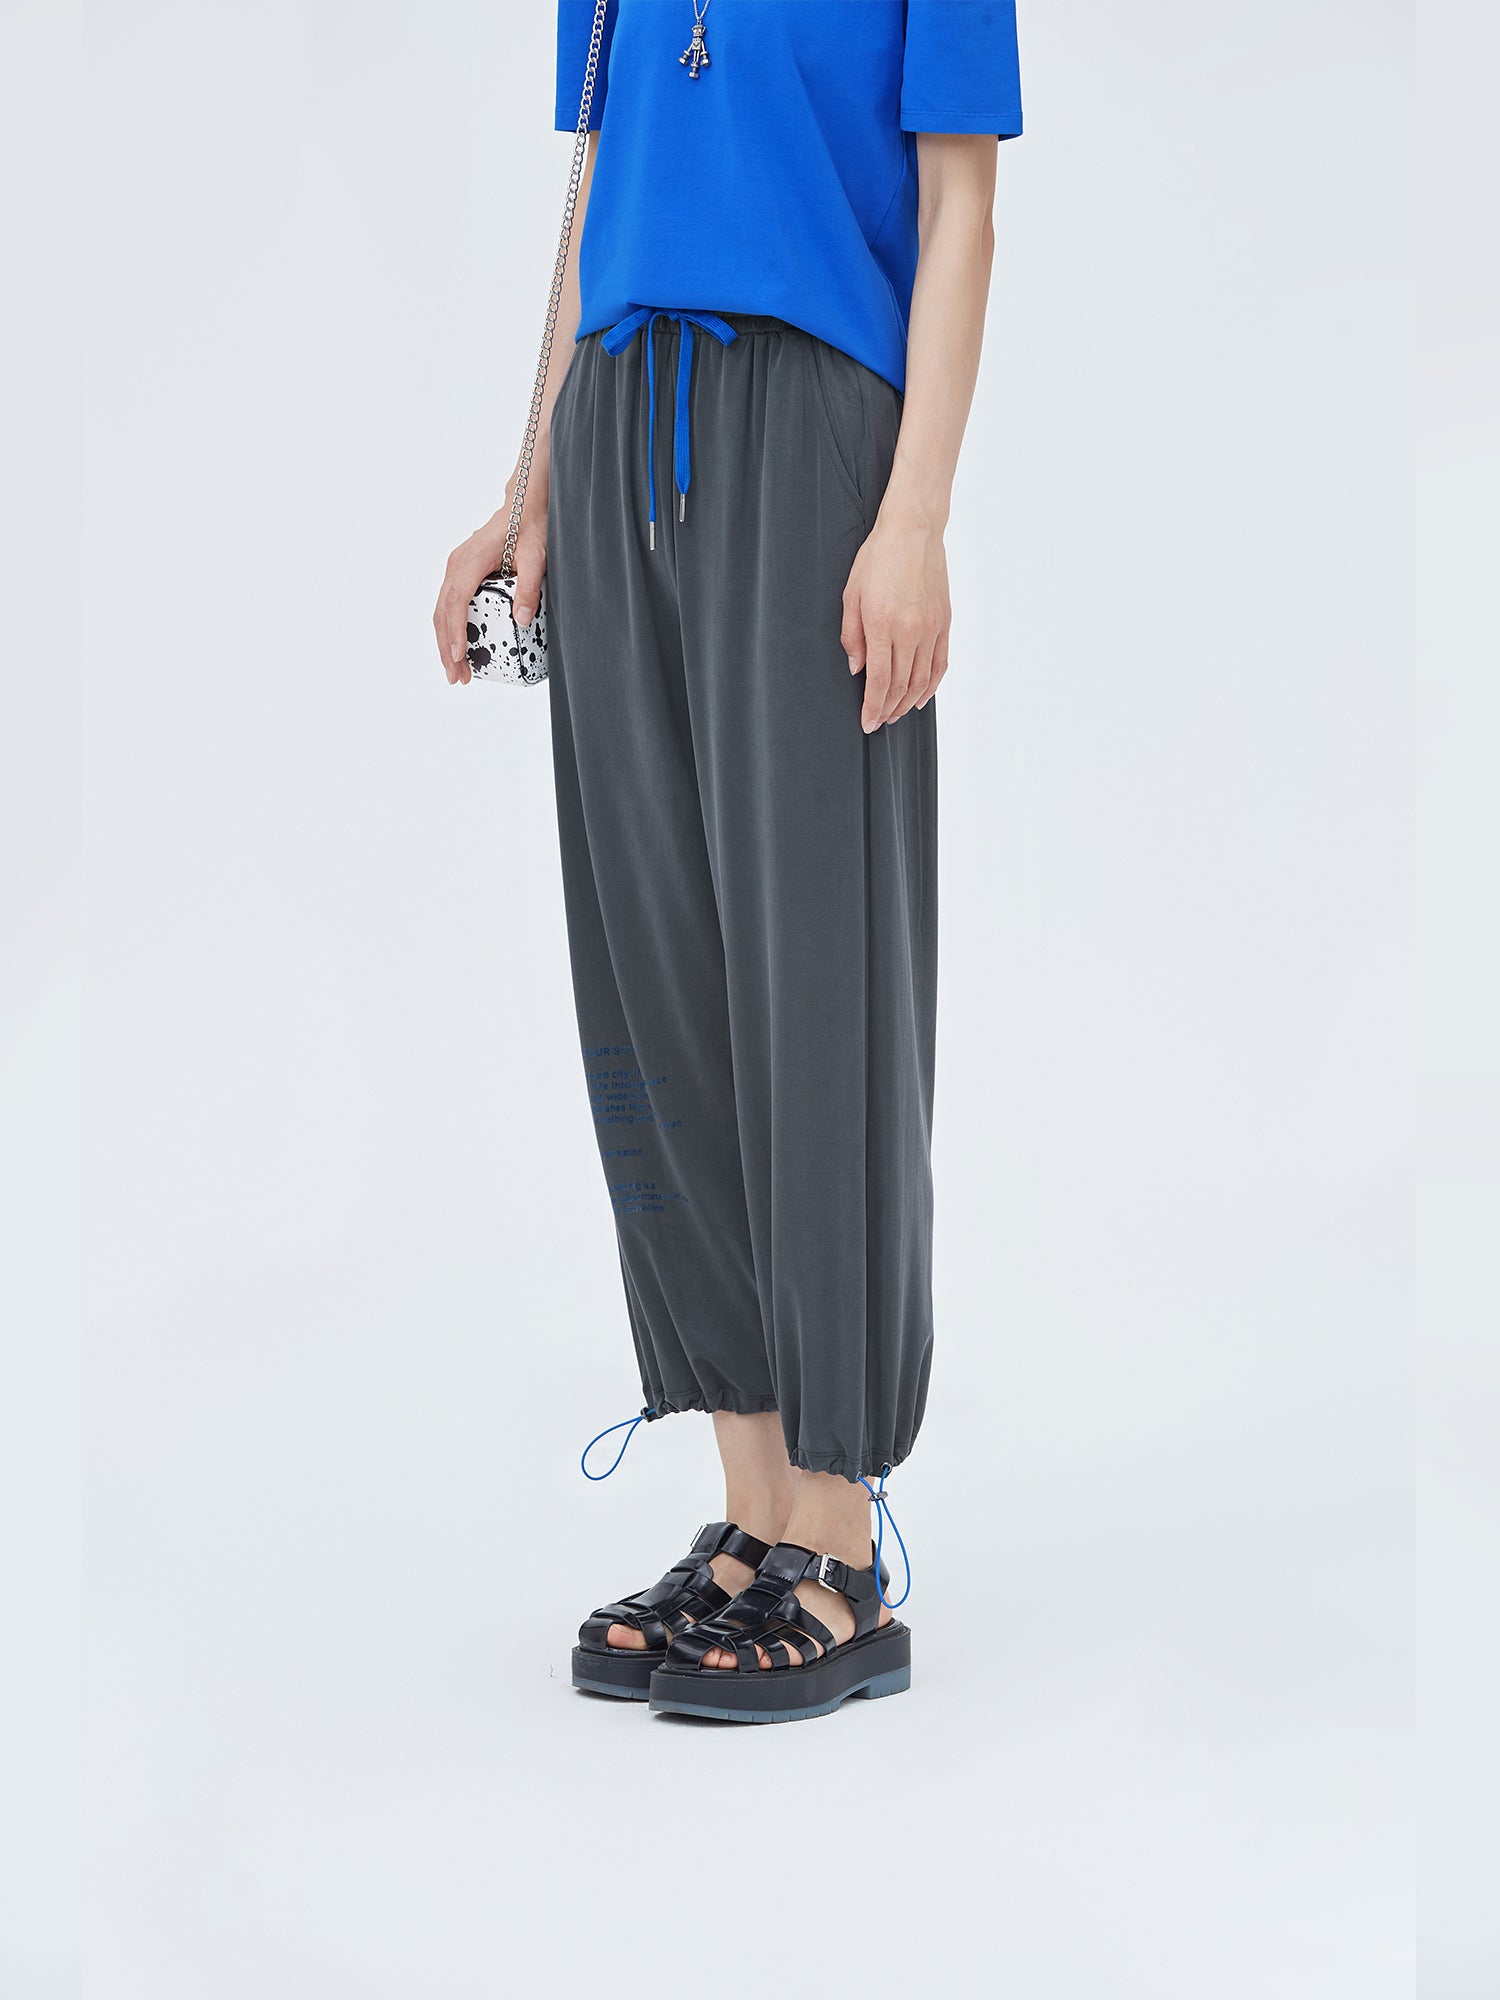 Drawstring Elasticized Contrasting Letters Athletic Pants